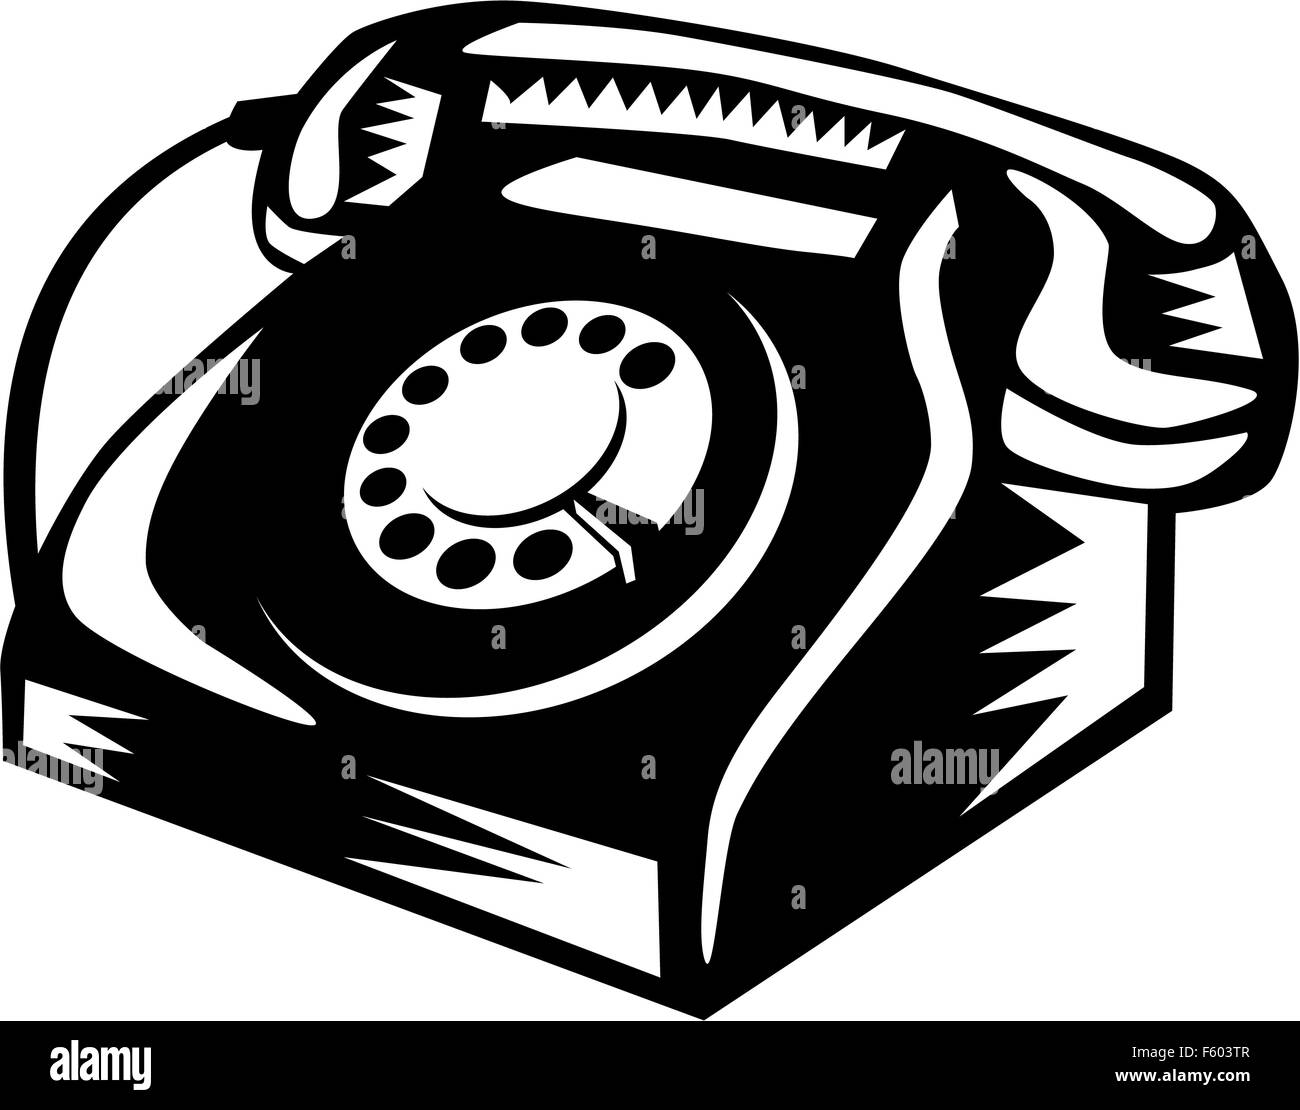 Illustration of a vintage telephone viewed from the front set on isolated white background done in retro woodcut style. Stock Photo